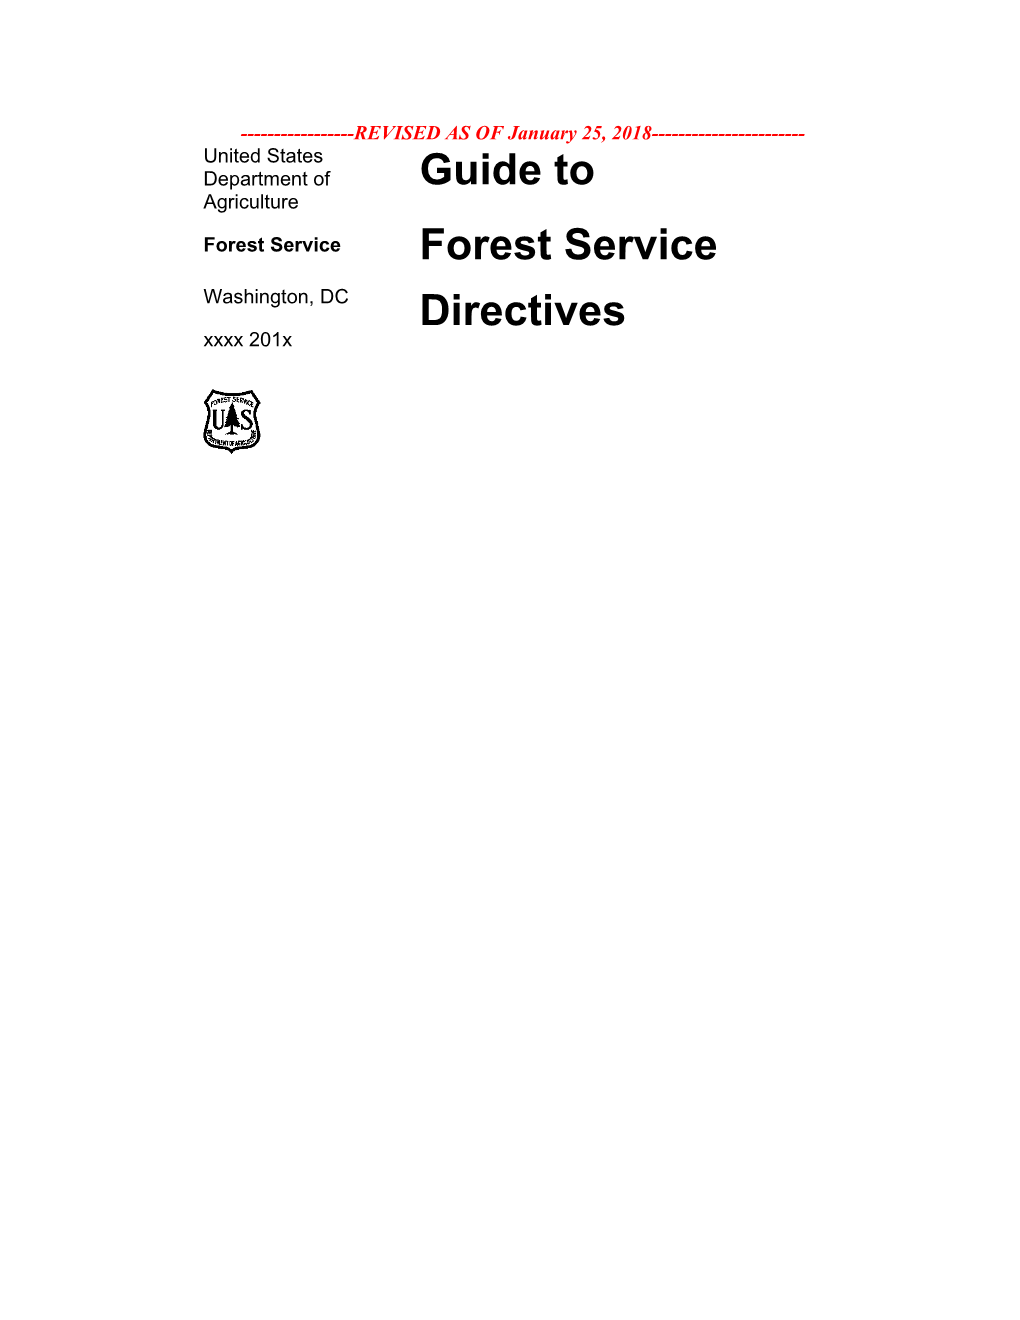 Guide to Forest Service Directives